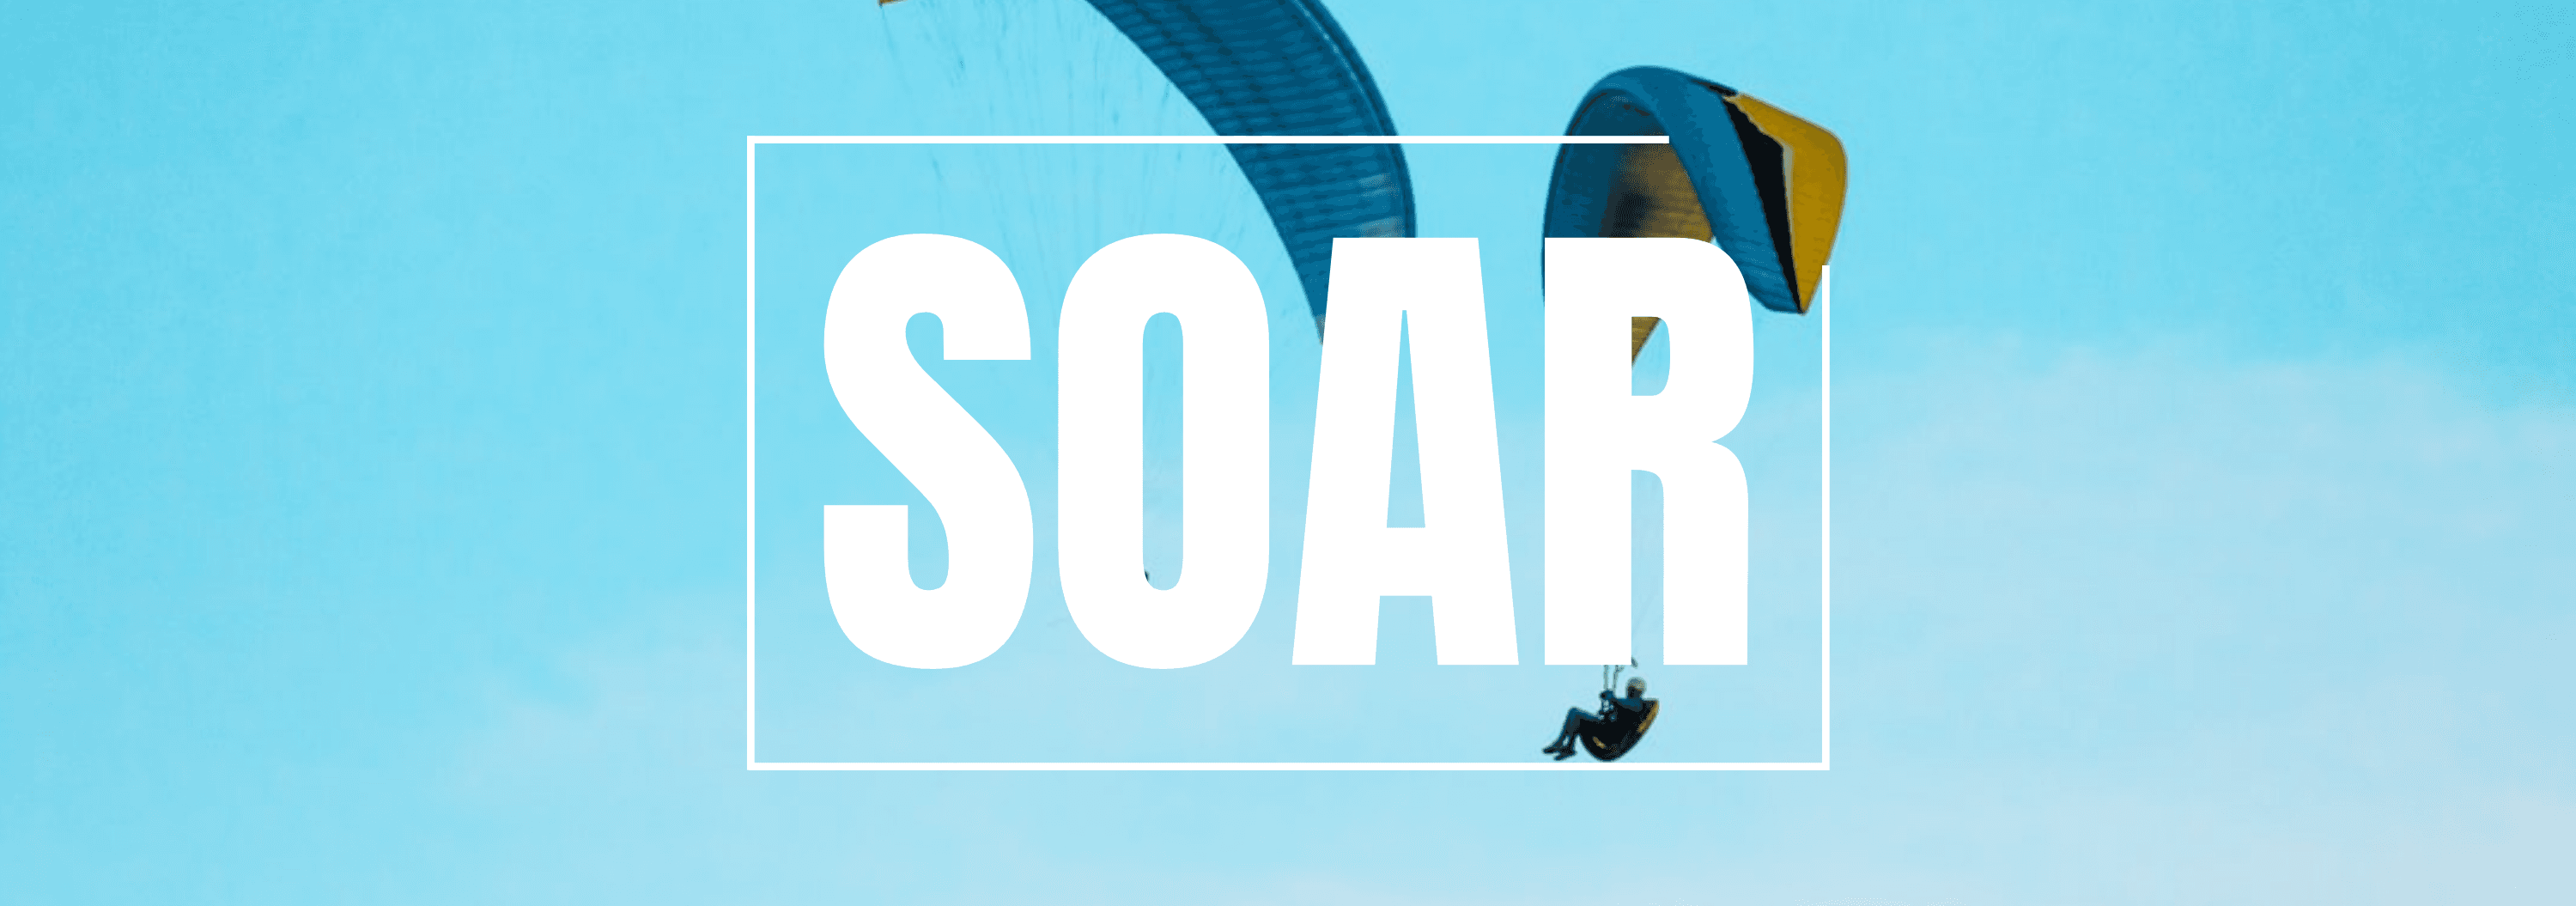 man-flying-with-parachute-soar-tumblr-banner-template-thumbnail-img